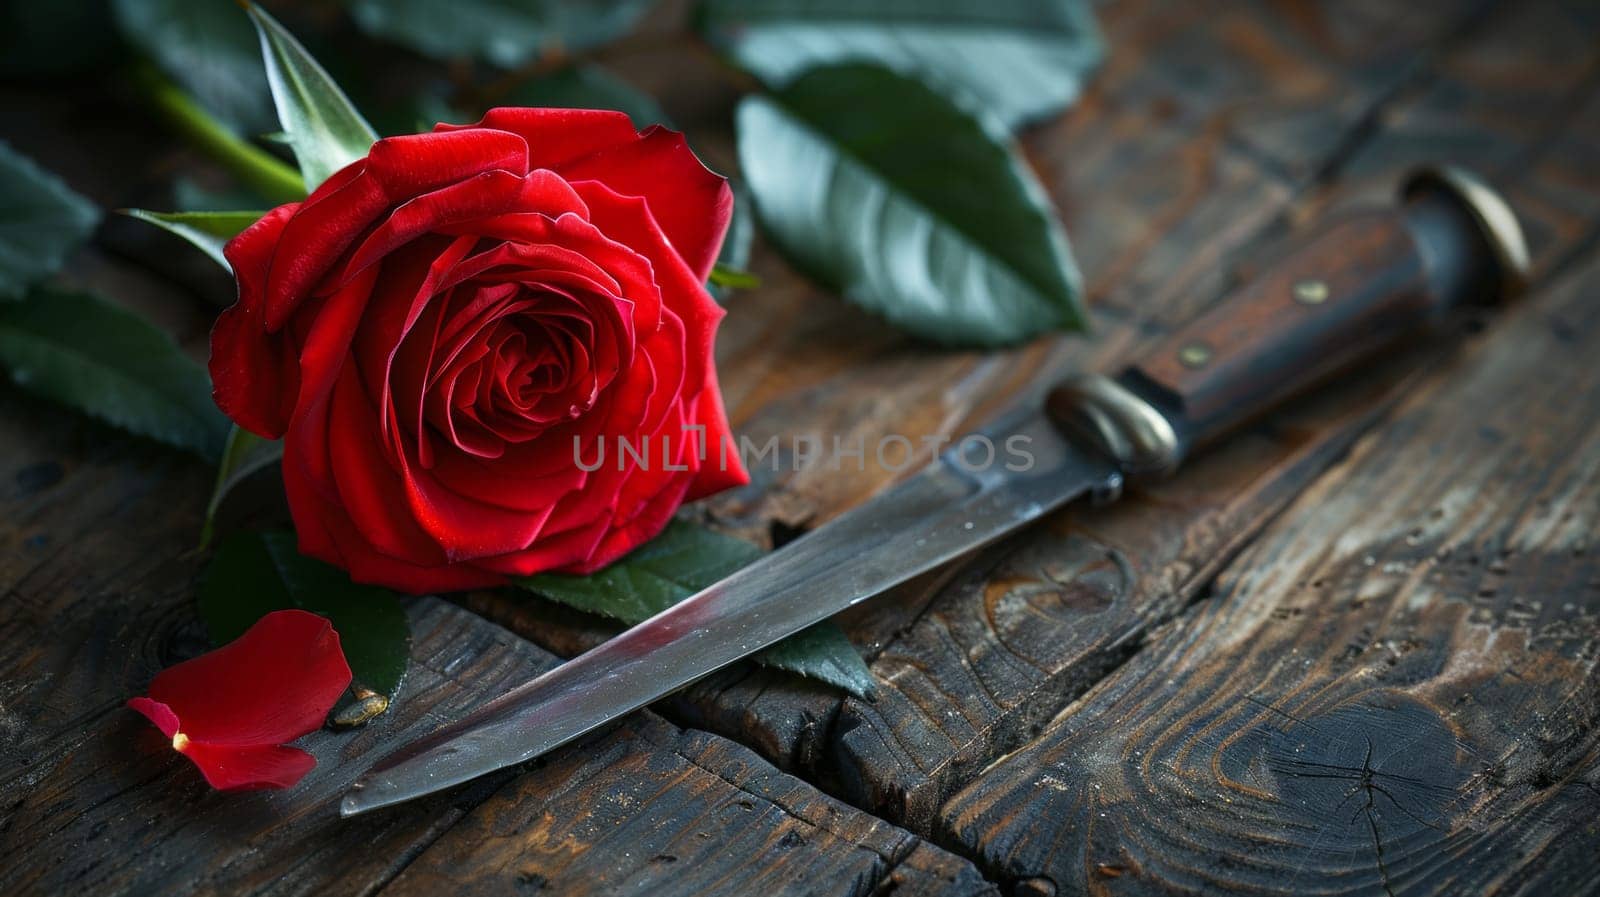 A knife and a red rose on the table with leaves